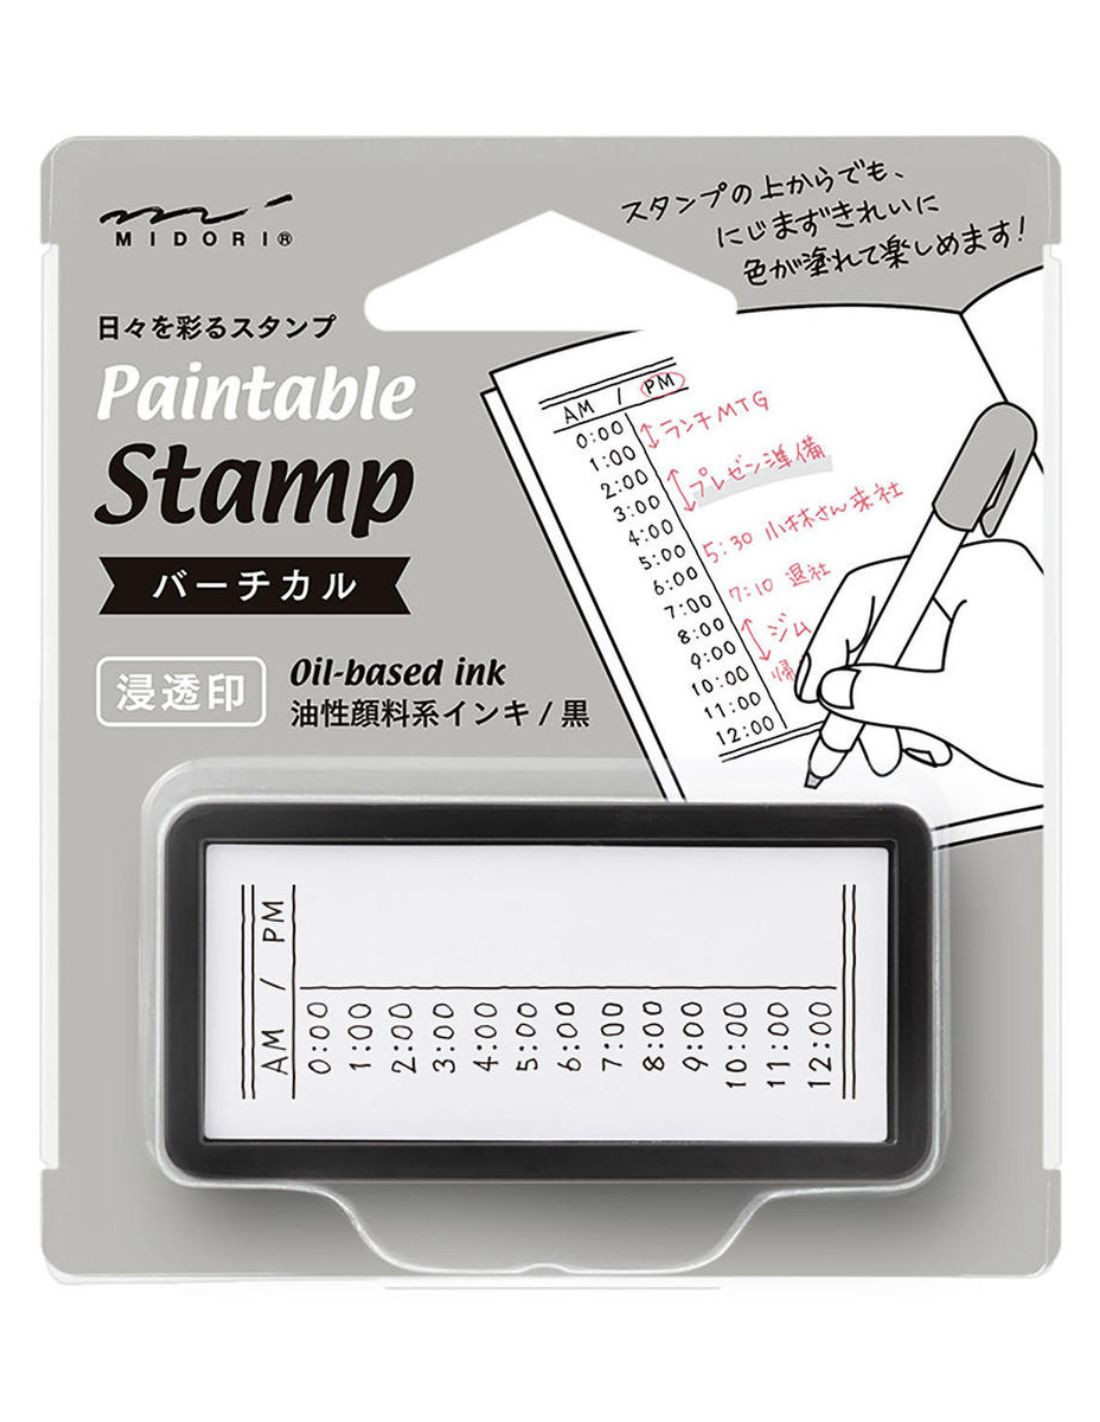 Pre-inked Paintable Stamp - Vertical Time - Midori